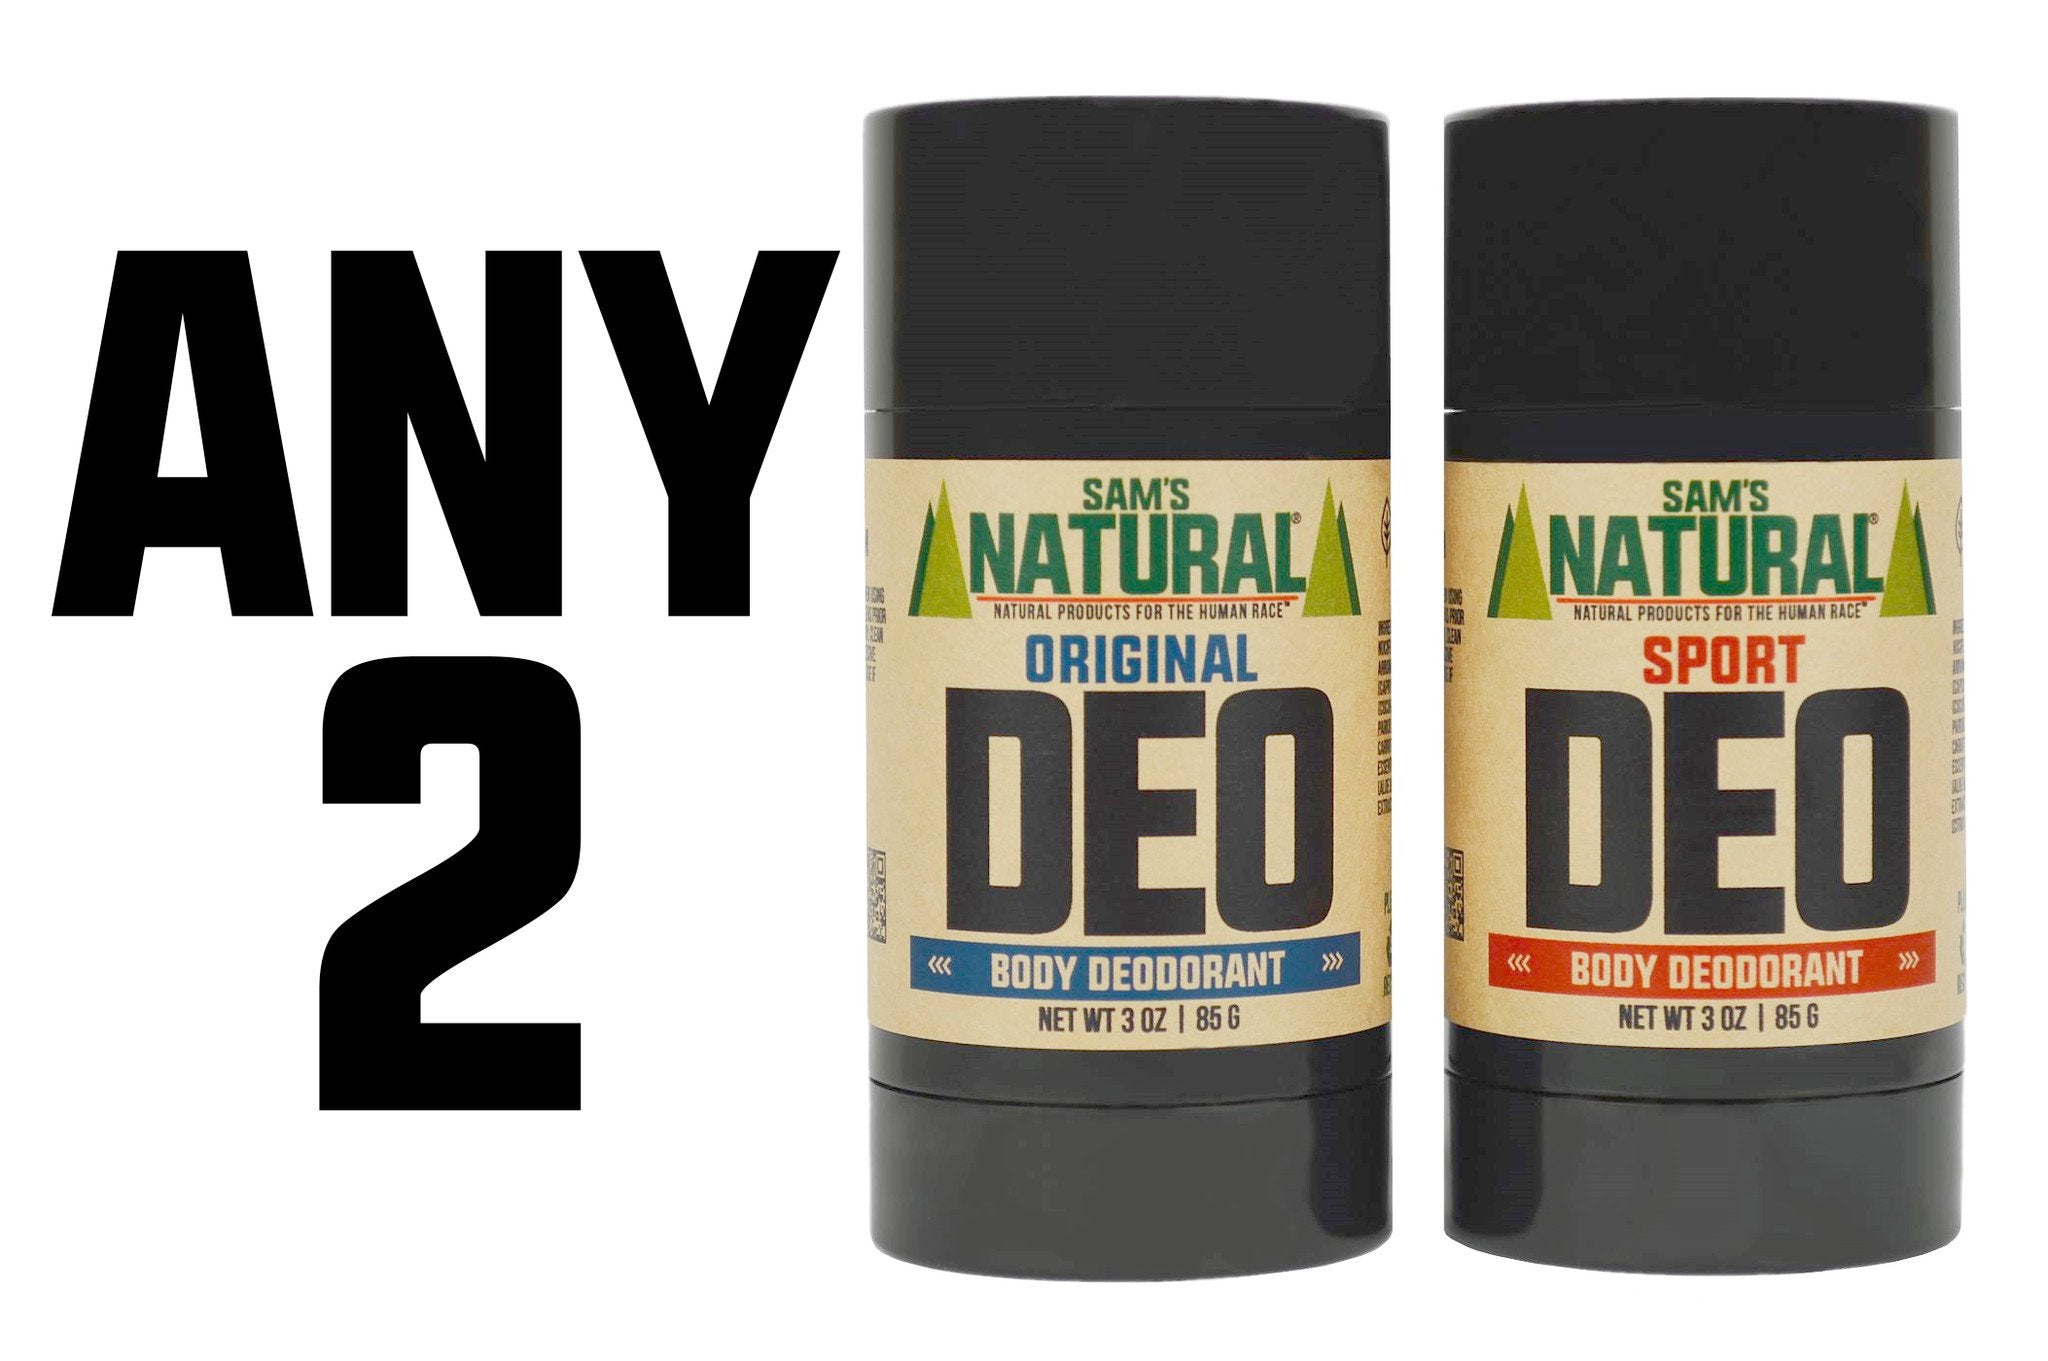 Are Natural Deodorants Really Better? - Dr. Squatch